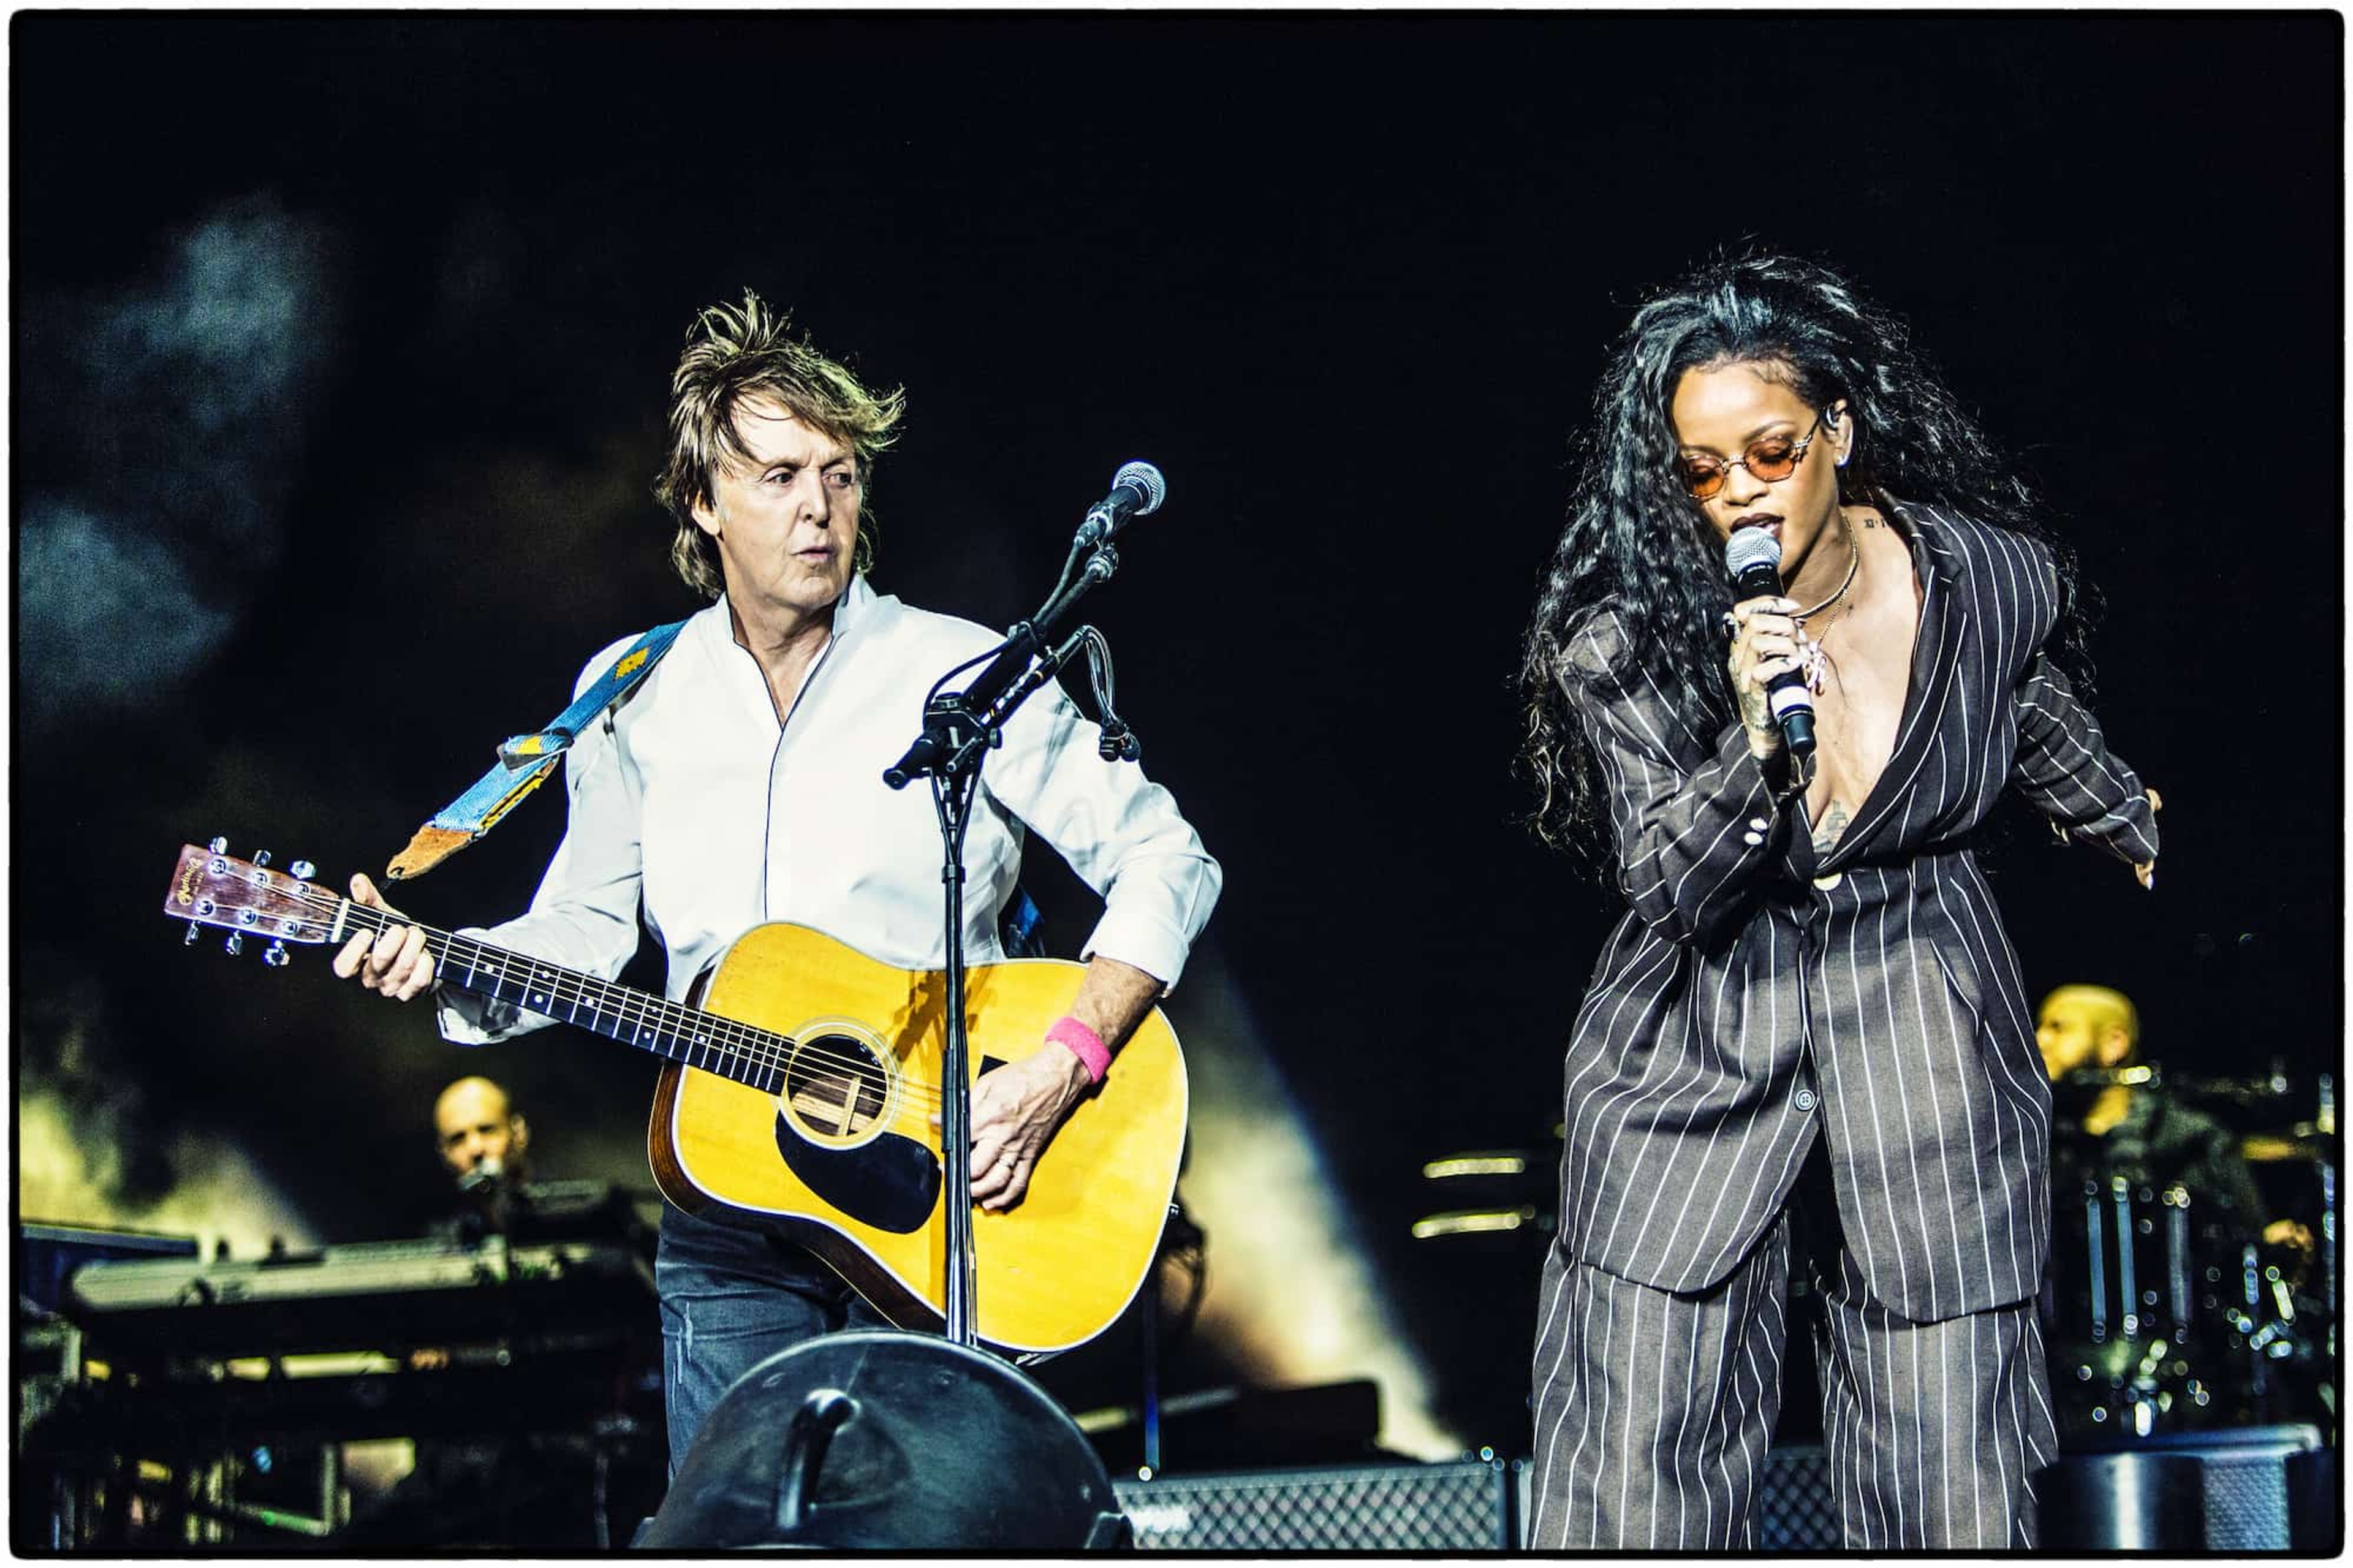 Photo of Paul McCartney and Rihanna performing 'FourFiveSeconds' at Desert Trip Festival 